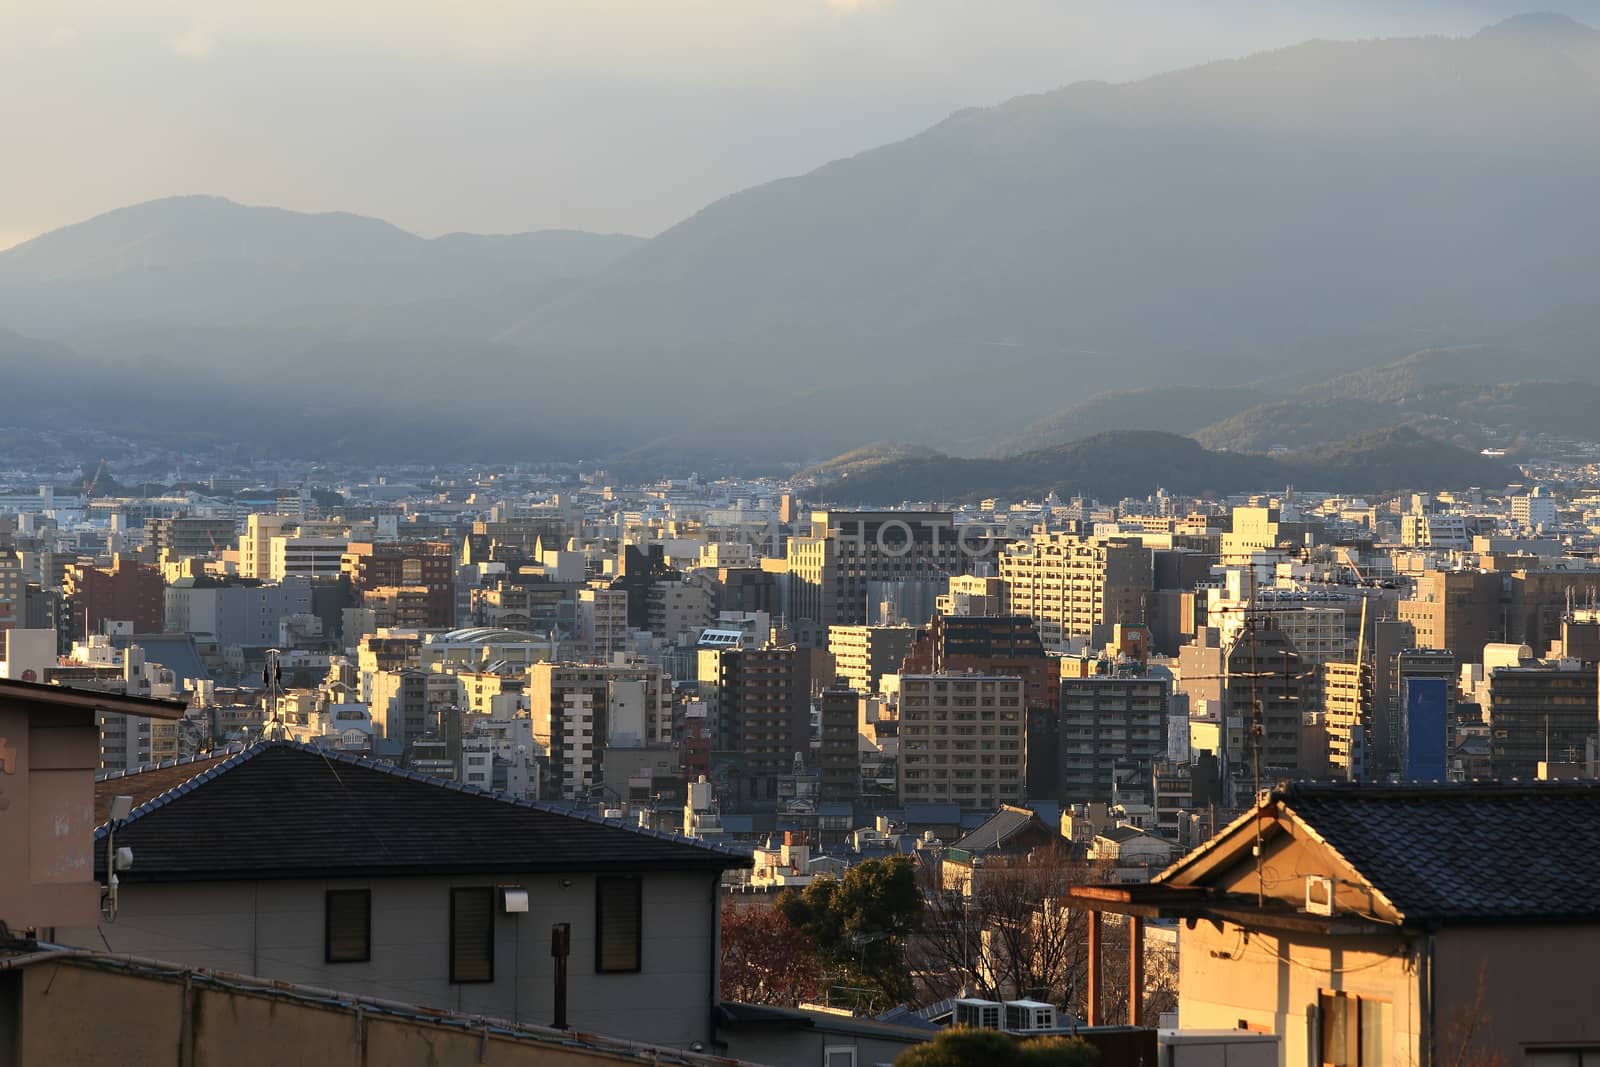 Kyoto, Japan - city in the region of Kansai. Aerial view with skyscrapers. Sunset light.